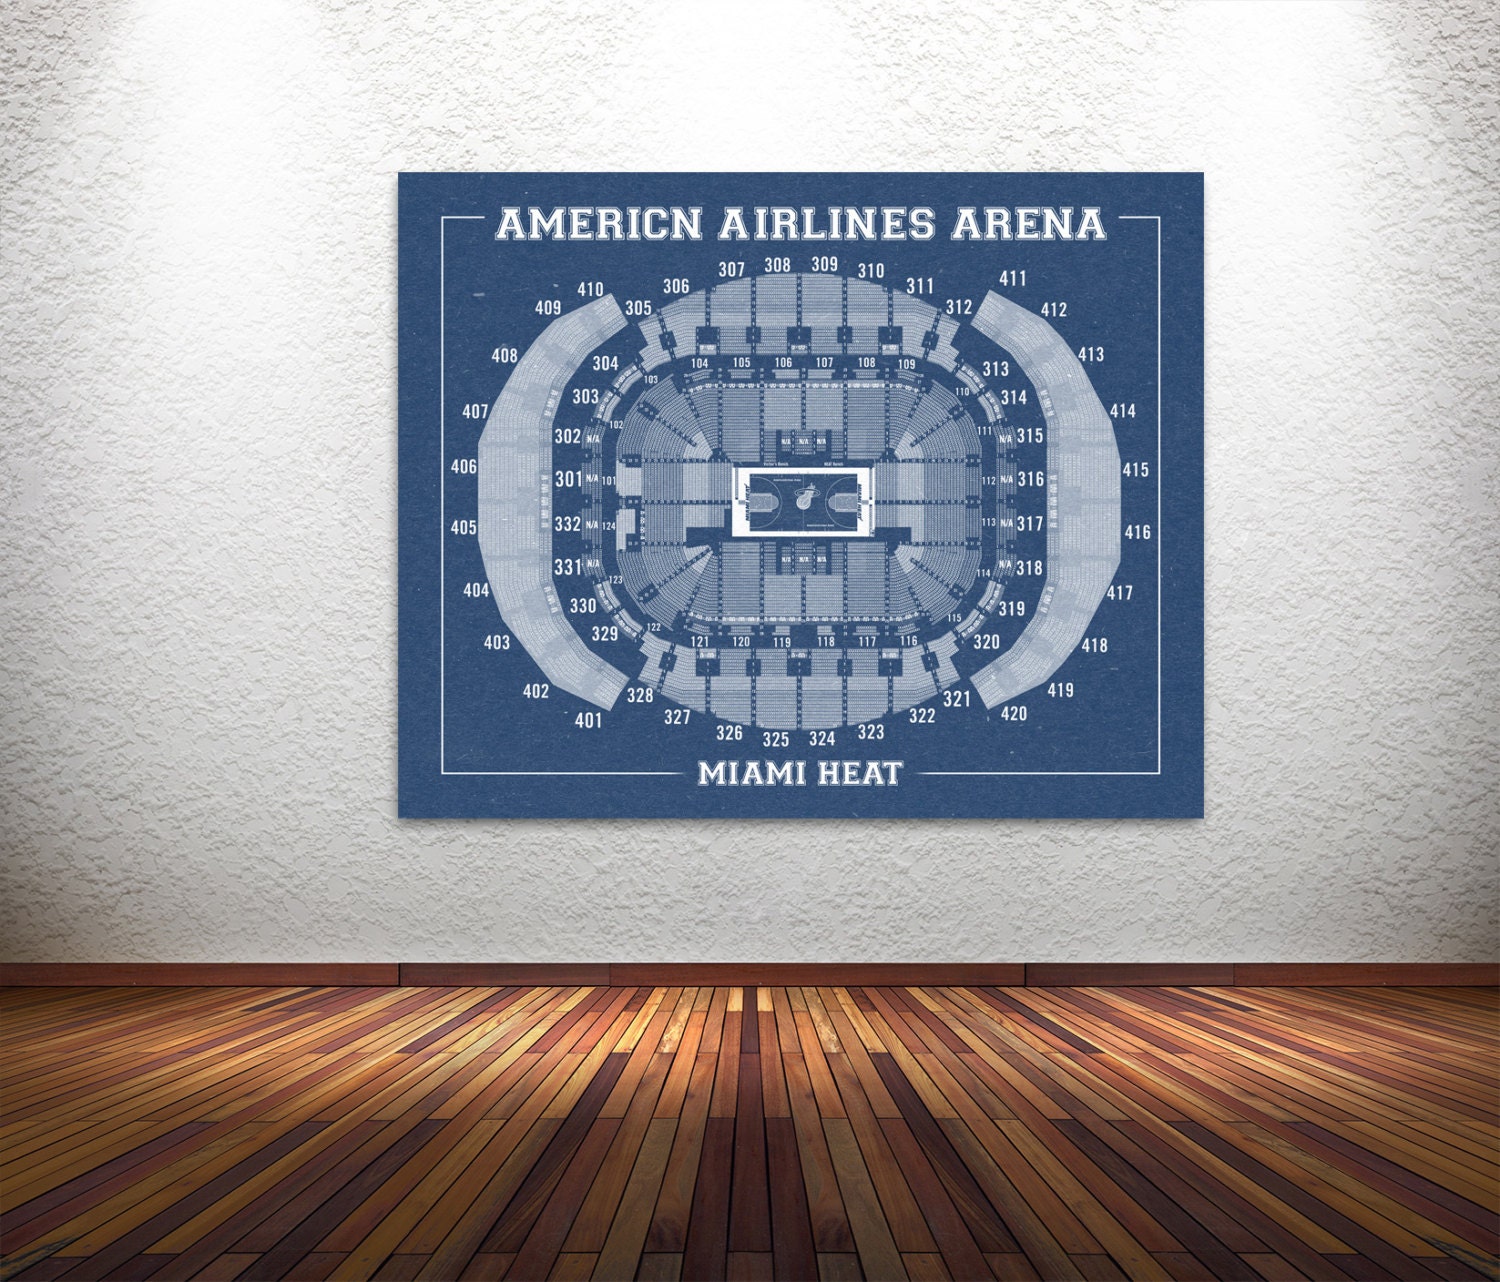 Airlines Arena Seating Chart